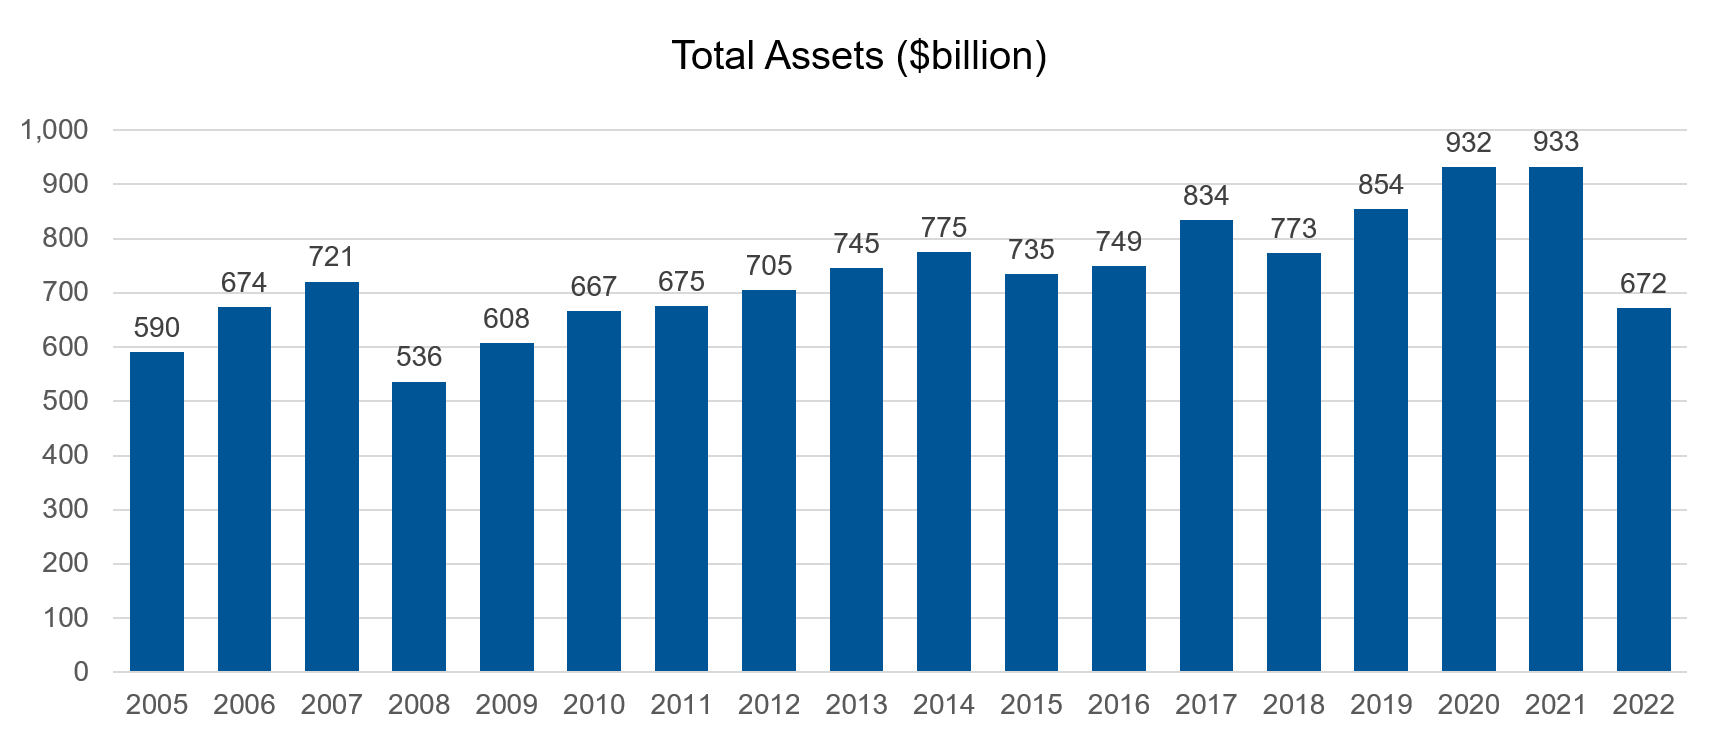 Bar chart of total assets from 2005 to 2022